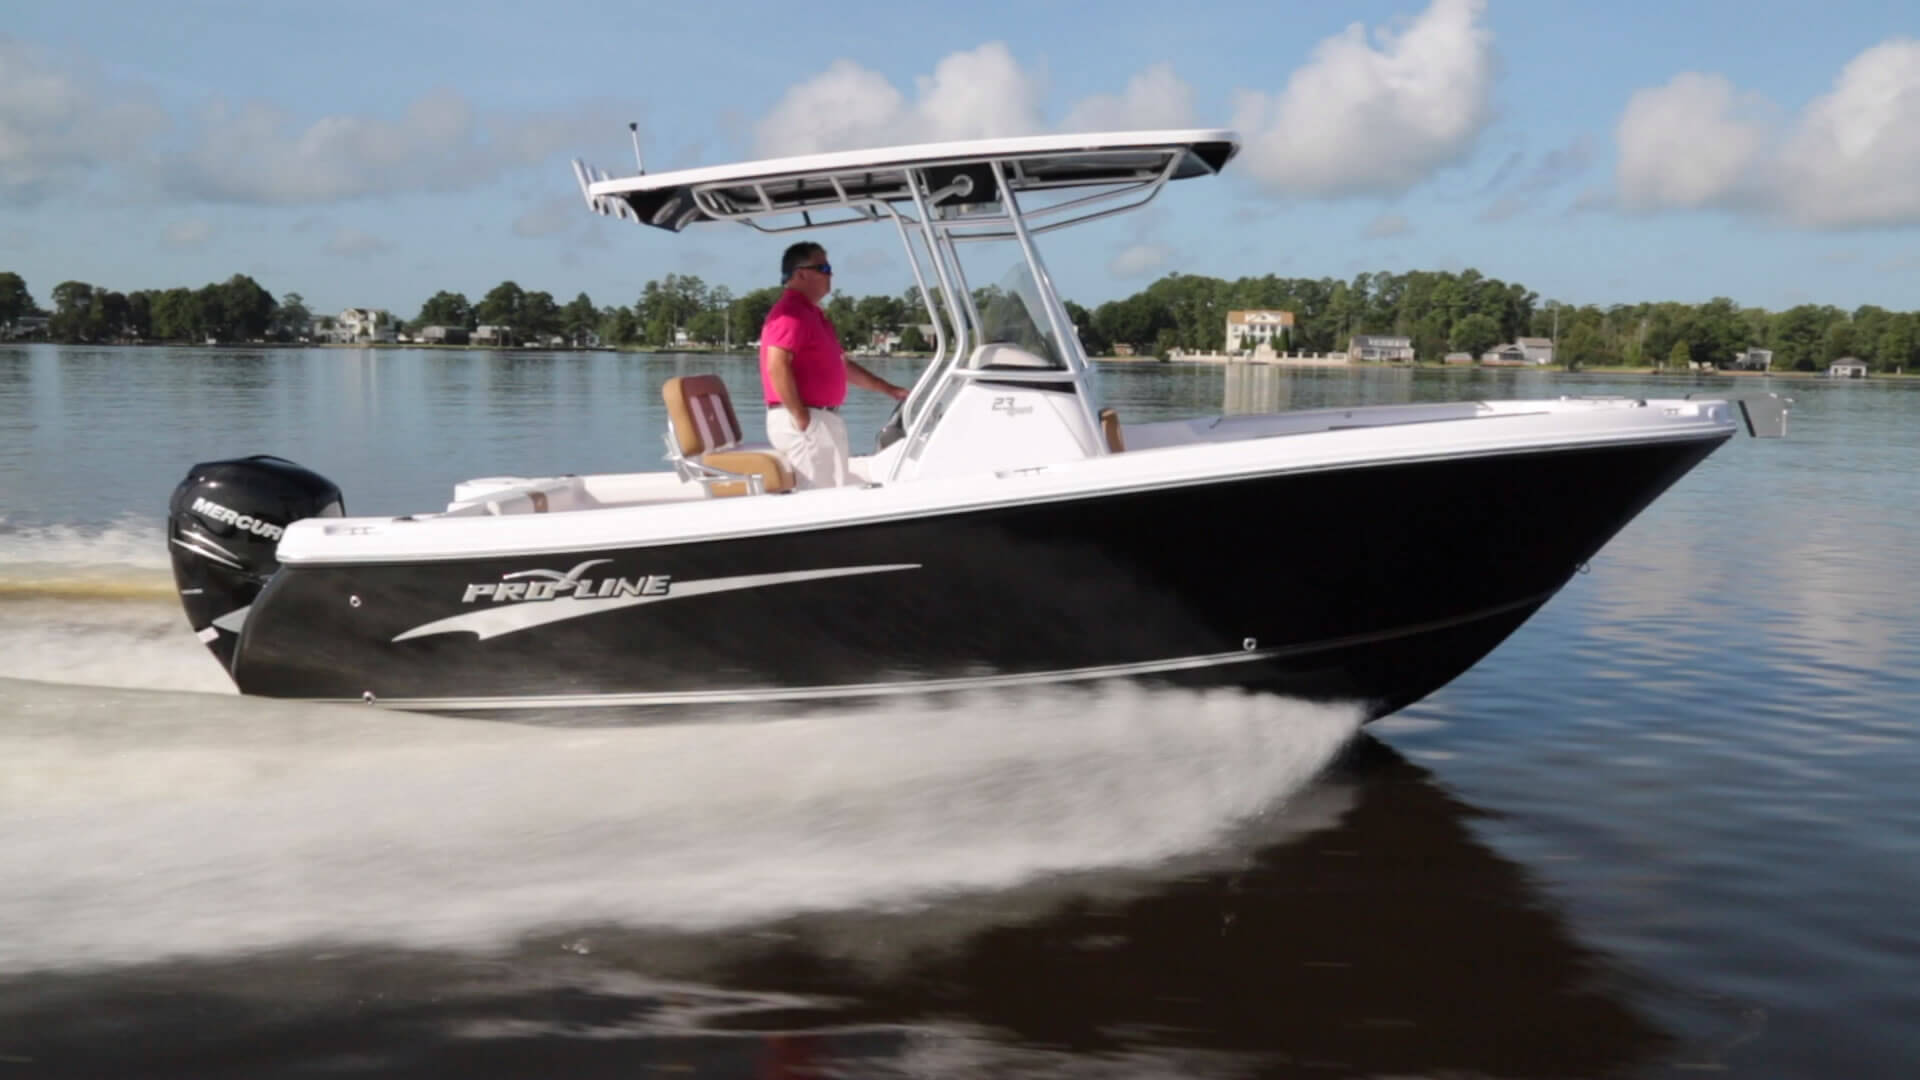 Pro-Line Boats, Manufacturer of Quality Pleasure & Fishing Boats